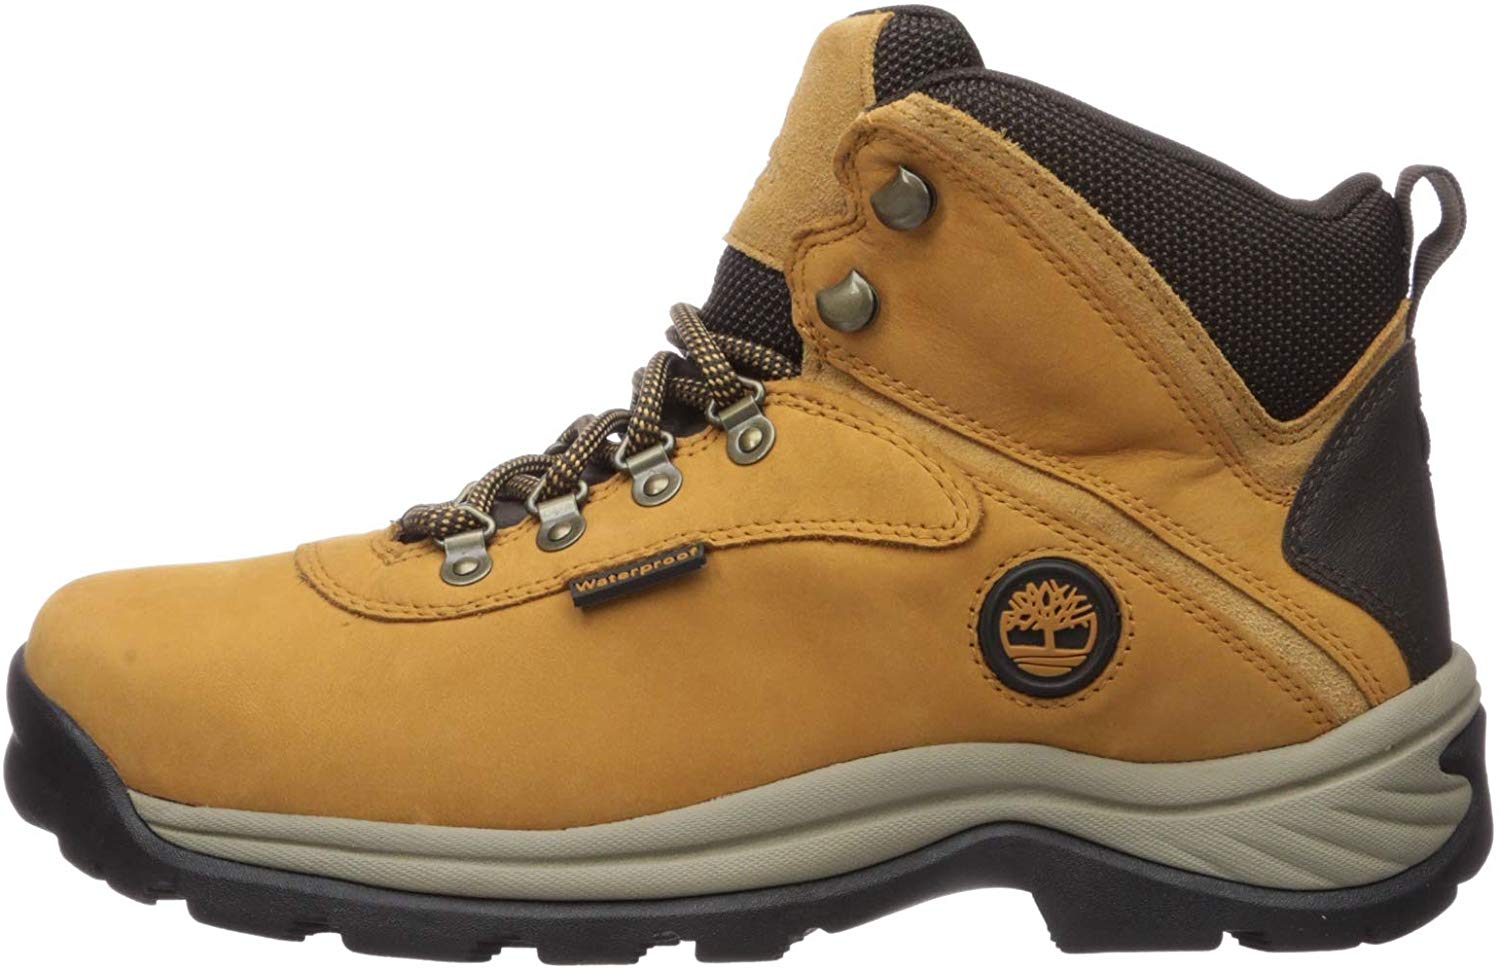 timberland men's white ledge mid waterproof ankle boot